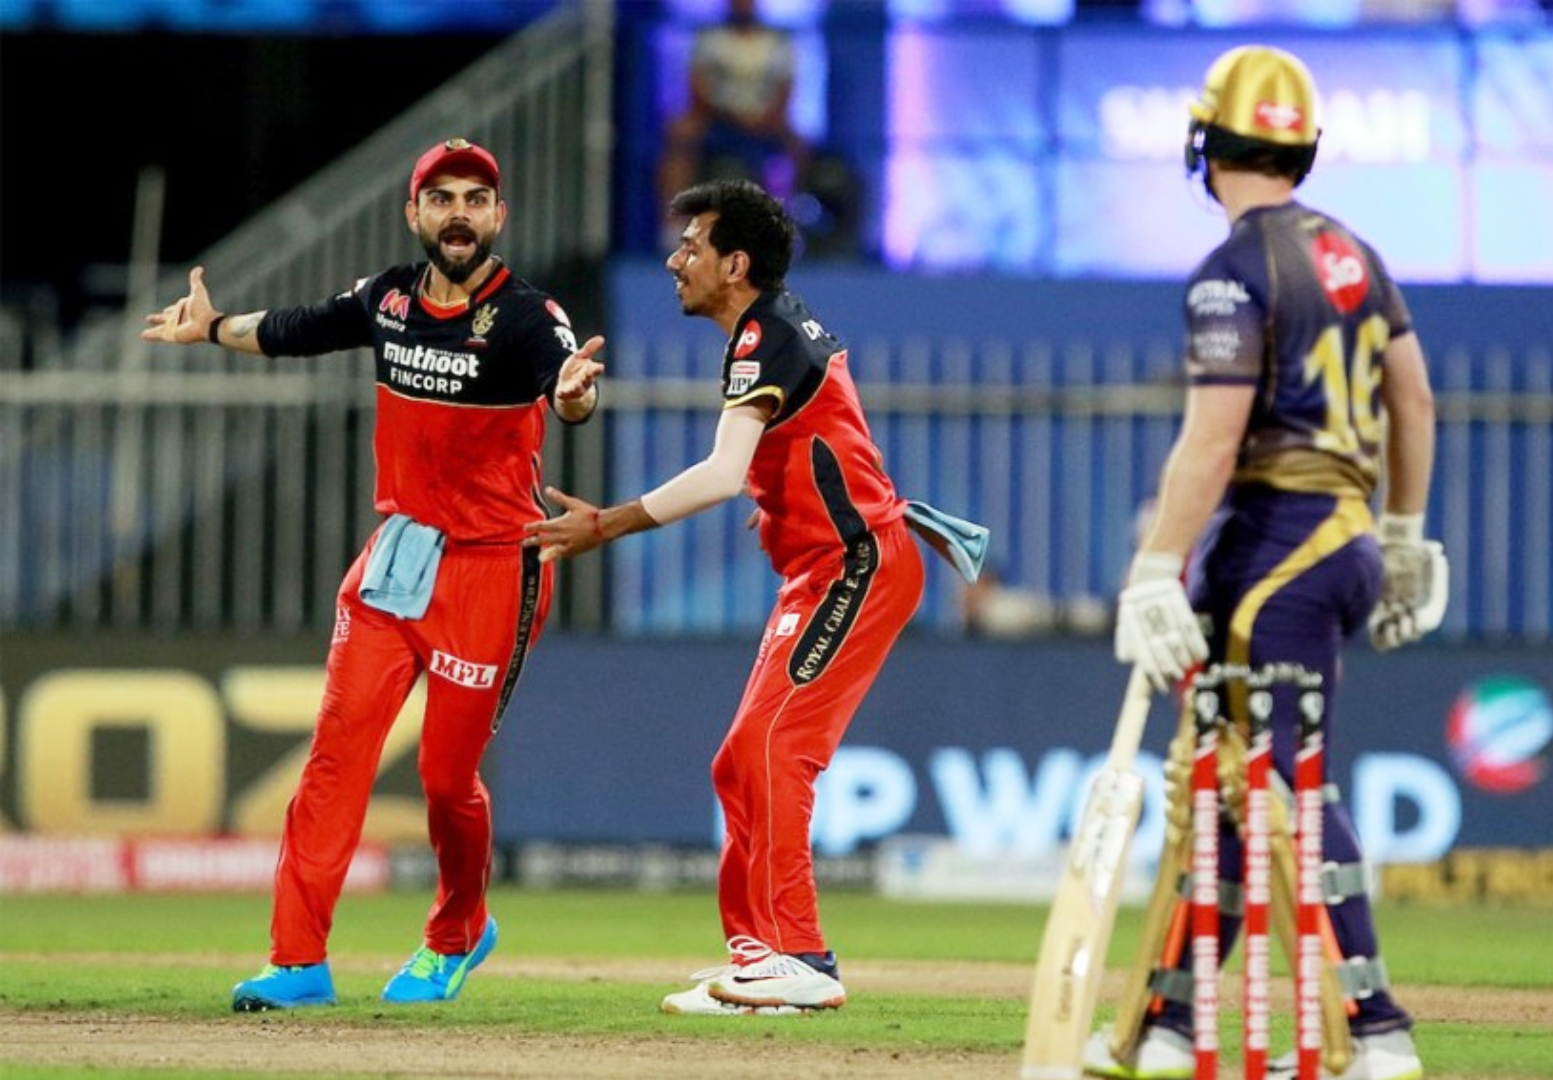 IPL2020 CSKvsMI Dhonis Chennai Gets Playoff Hopes From RR KKR Matches